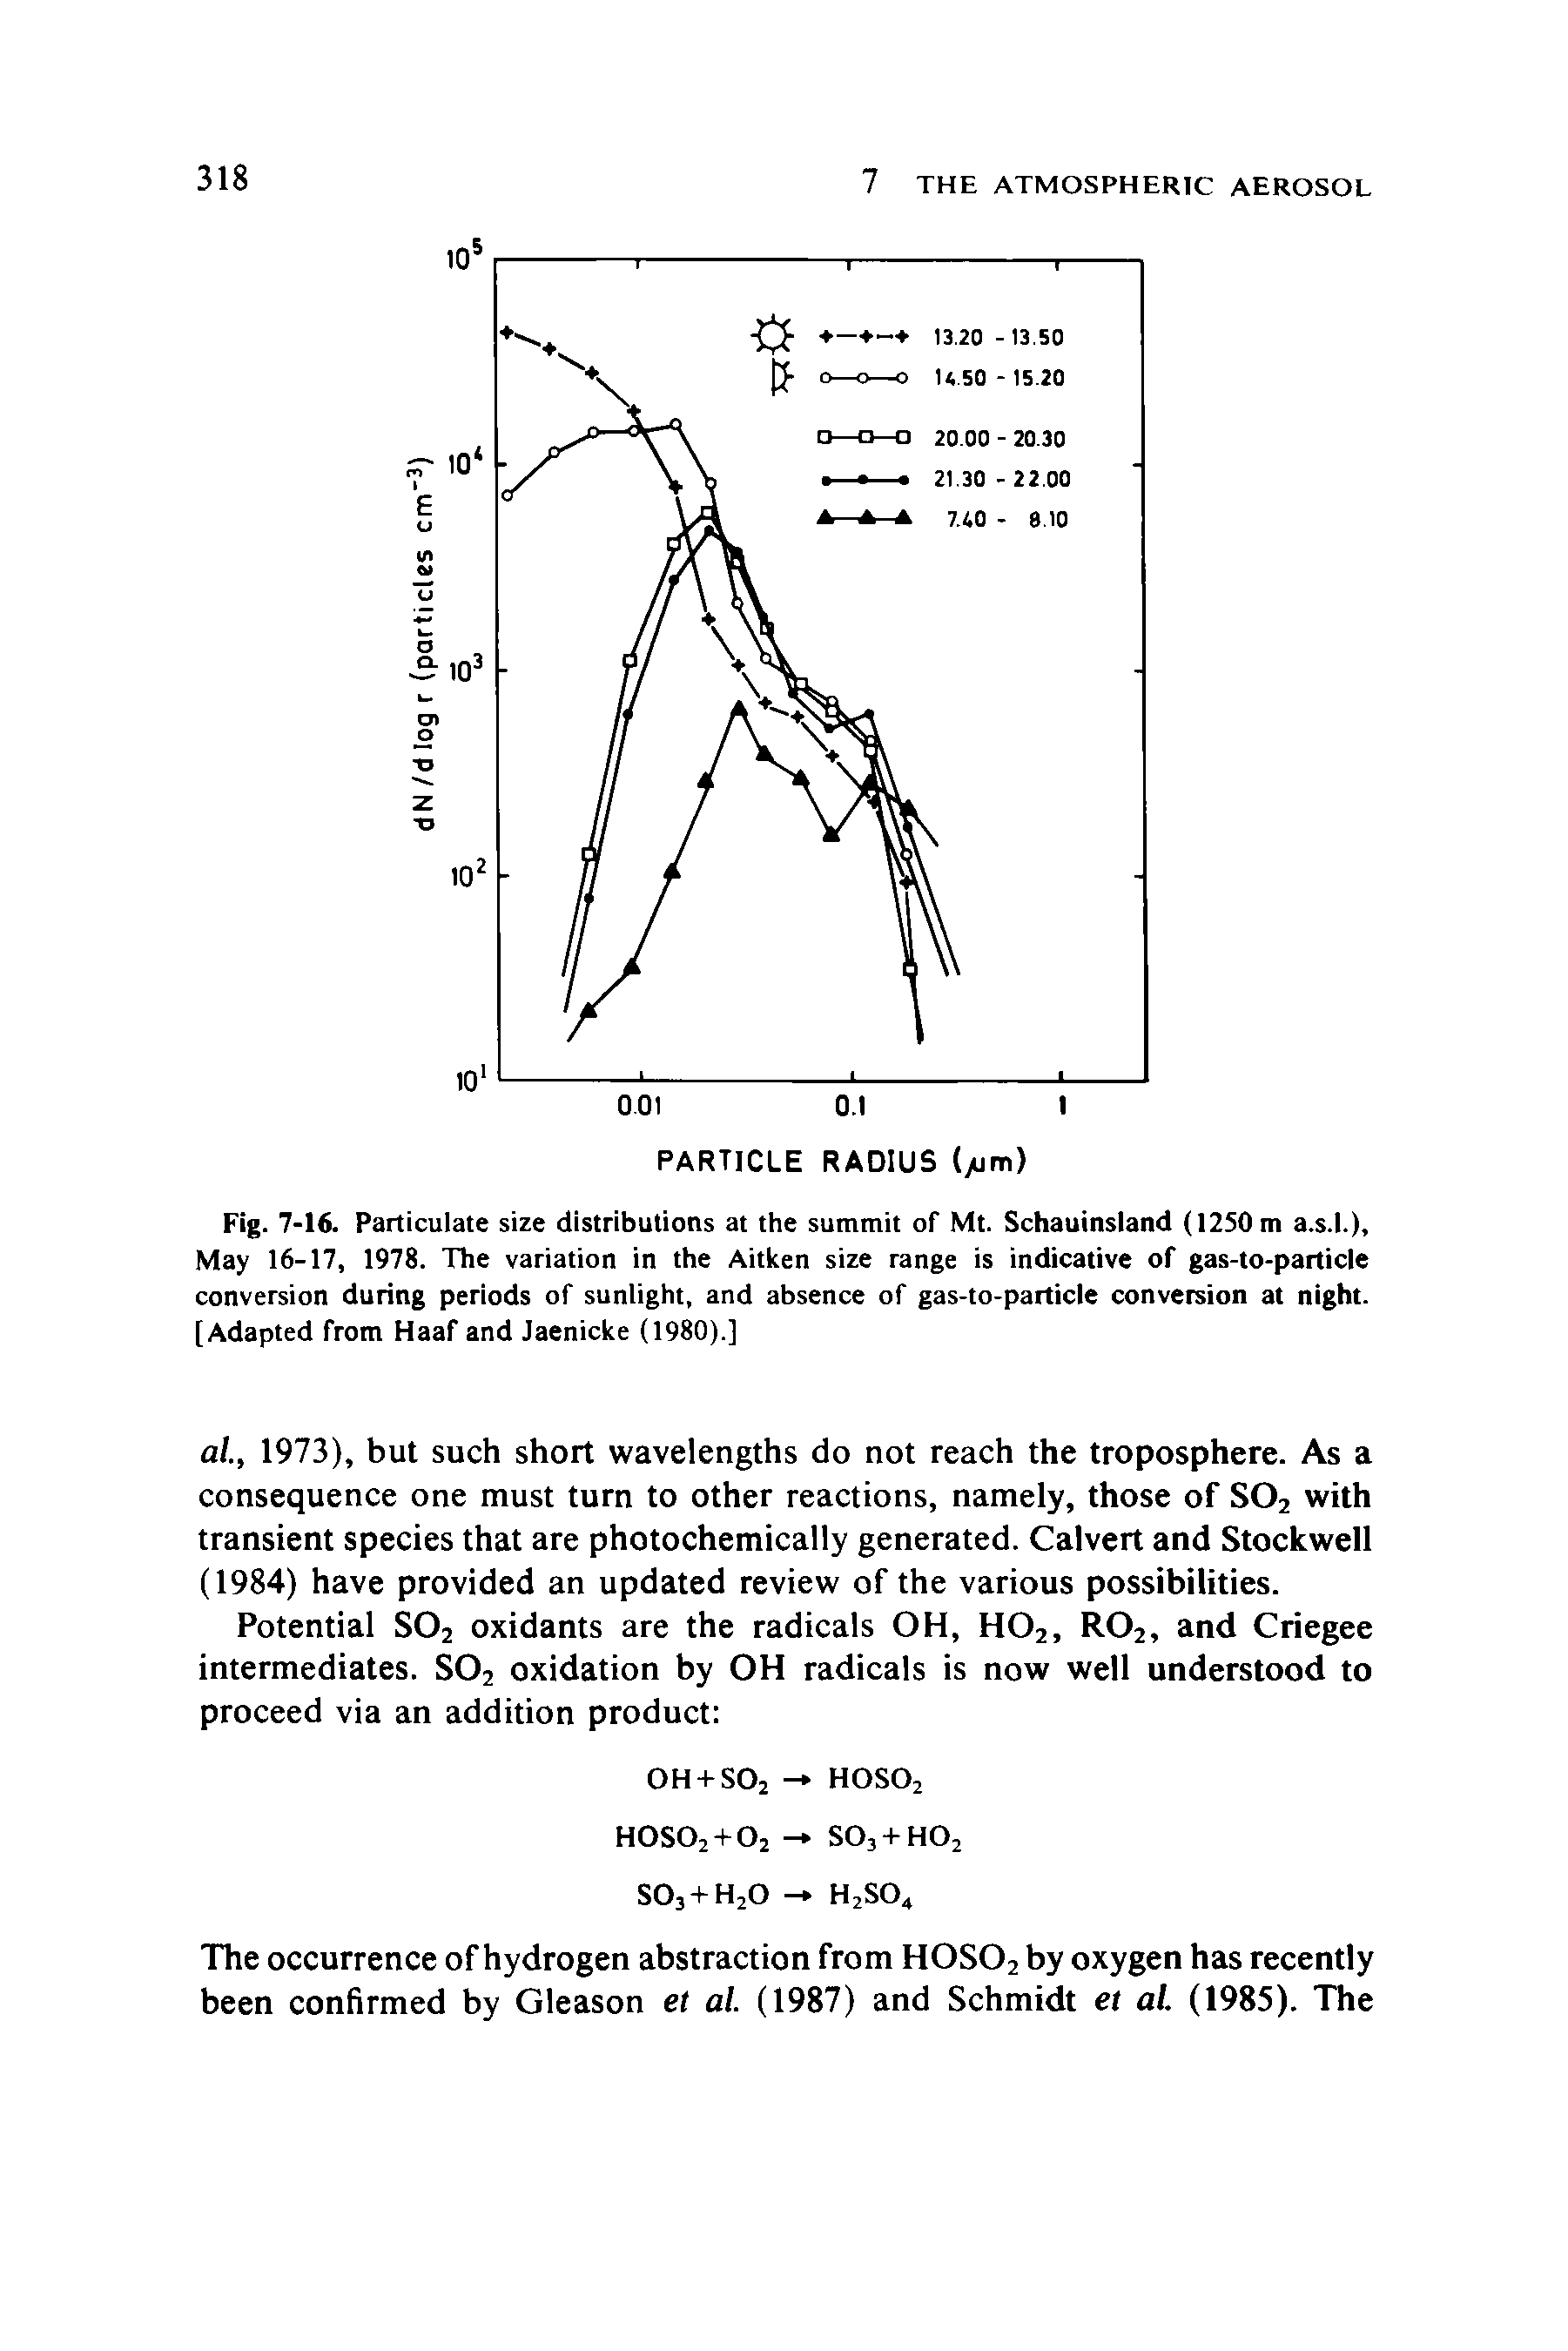 Fig. 7-16. Particulate size distributions at the summit of Mt. Schauinsland (1250 m a.s.l.), May 16-17, 1978. The variation in the Aitken size range is indicative of gas-to-particle conversion during periods of sunlight, and absence of gas-to-particle conversion at night. [Adapted from Haaf and Jaenicke (1980).]...